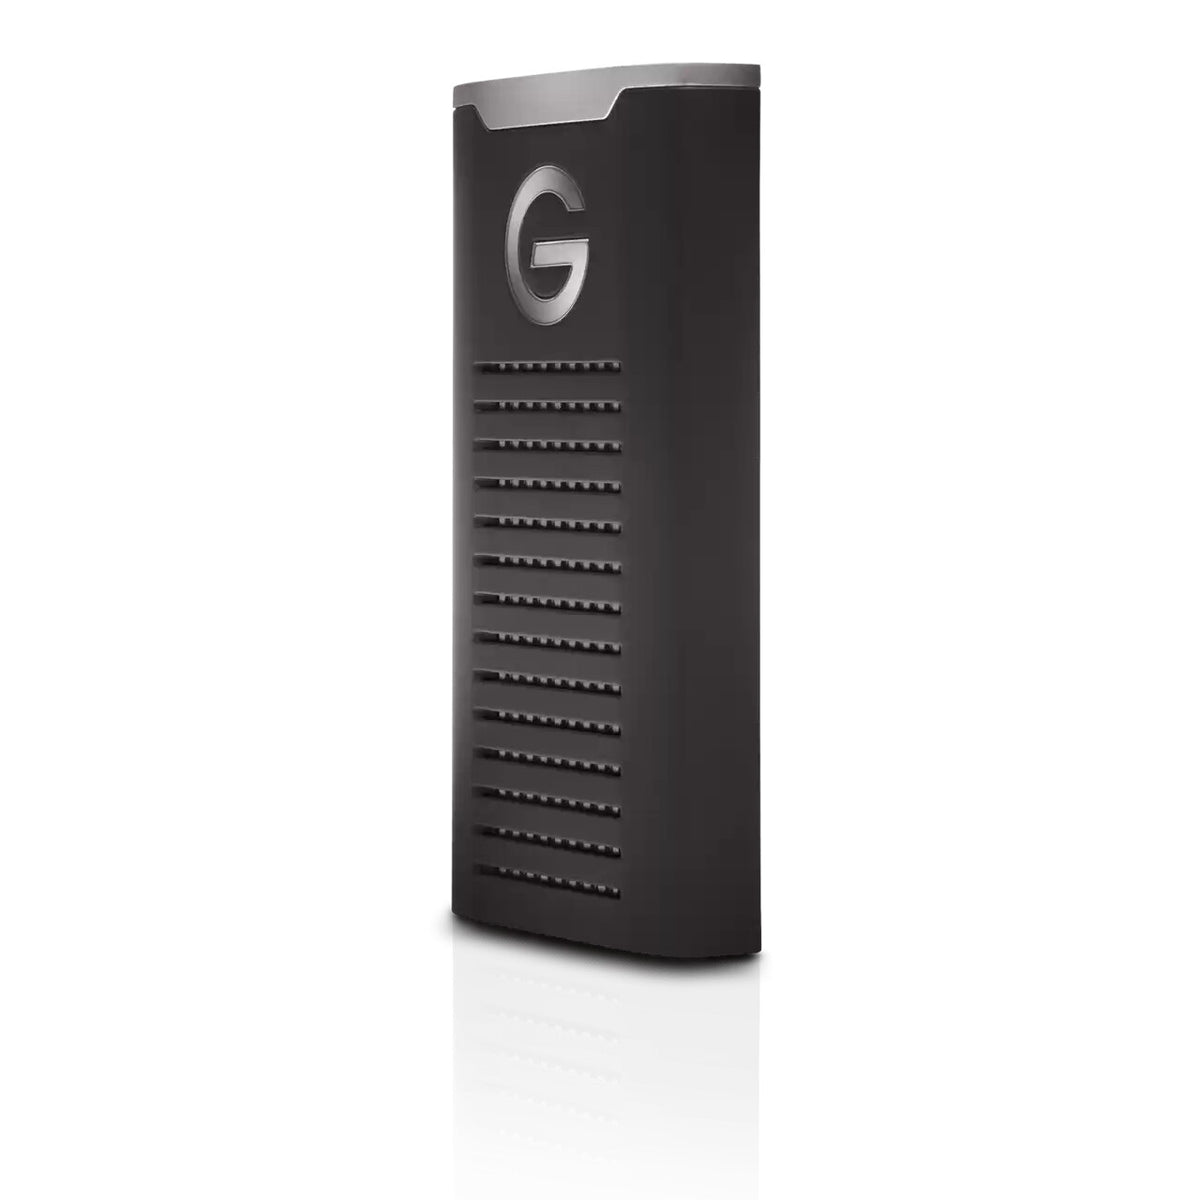 SanDisk G-DRIVE External solid state drive - 1 TB